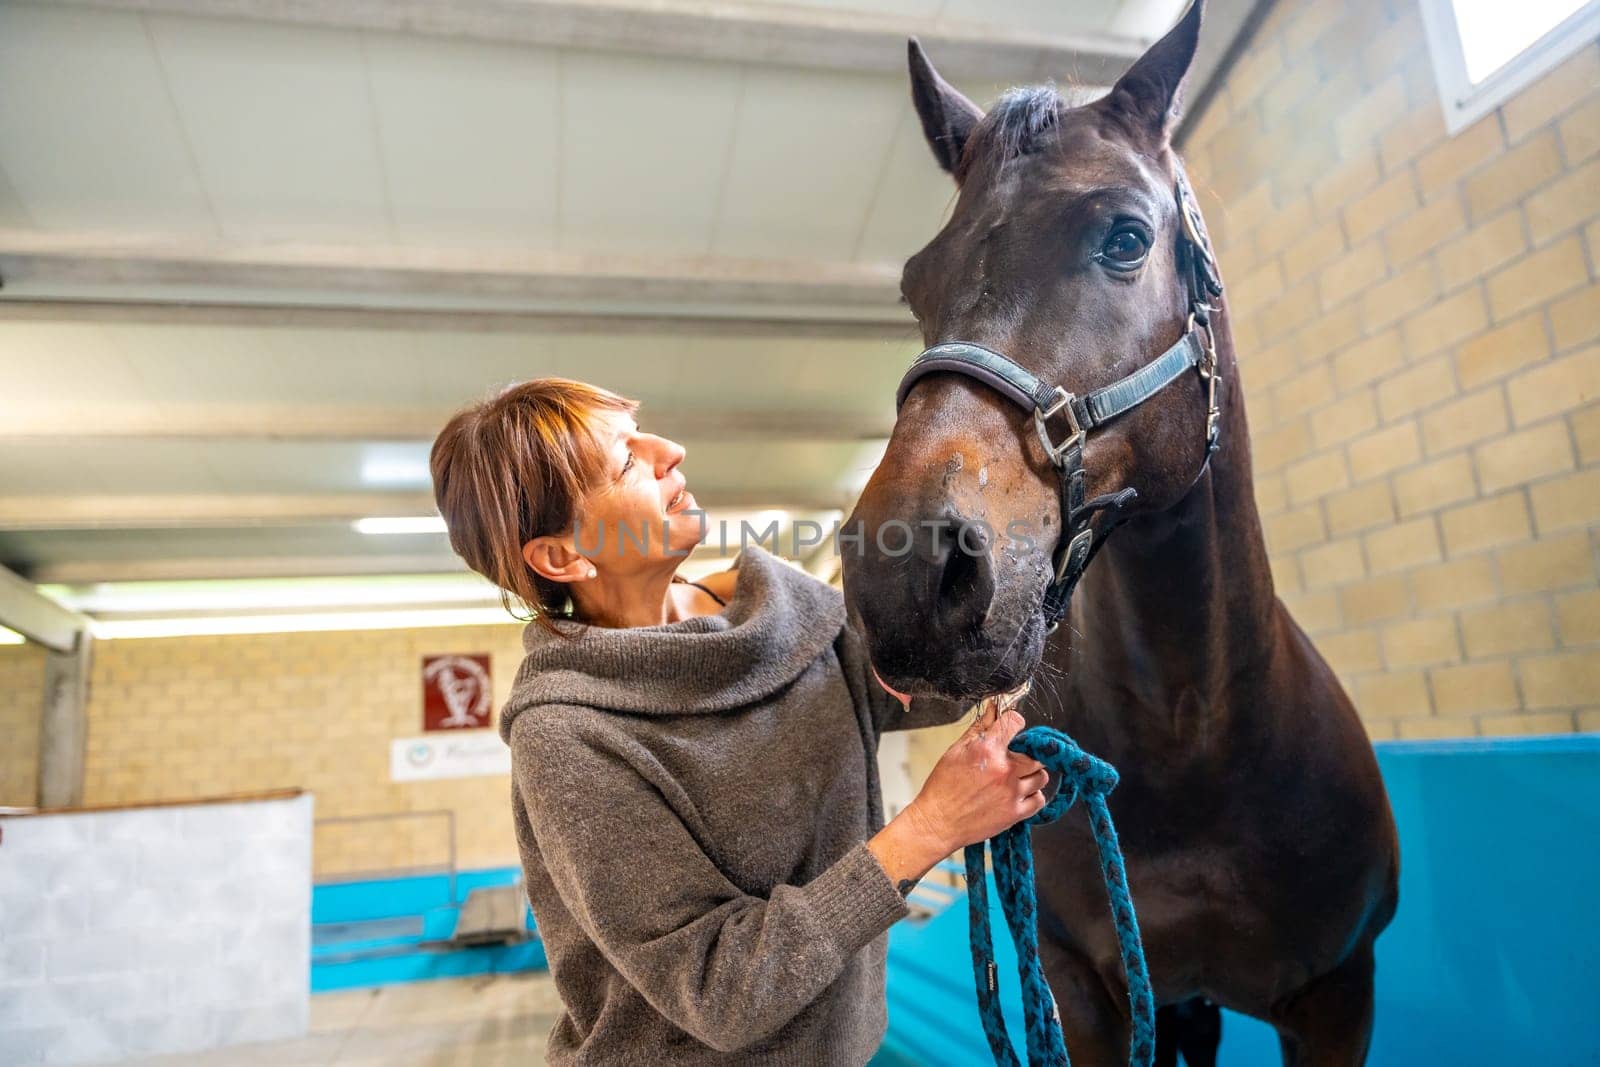 Tender look of a woman holding a horse in a rehabilitation equestrian center